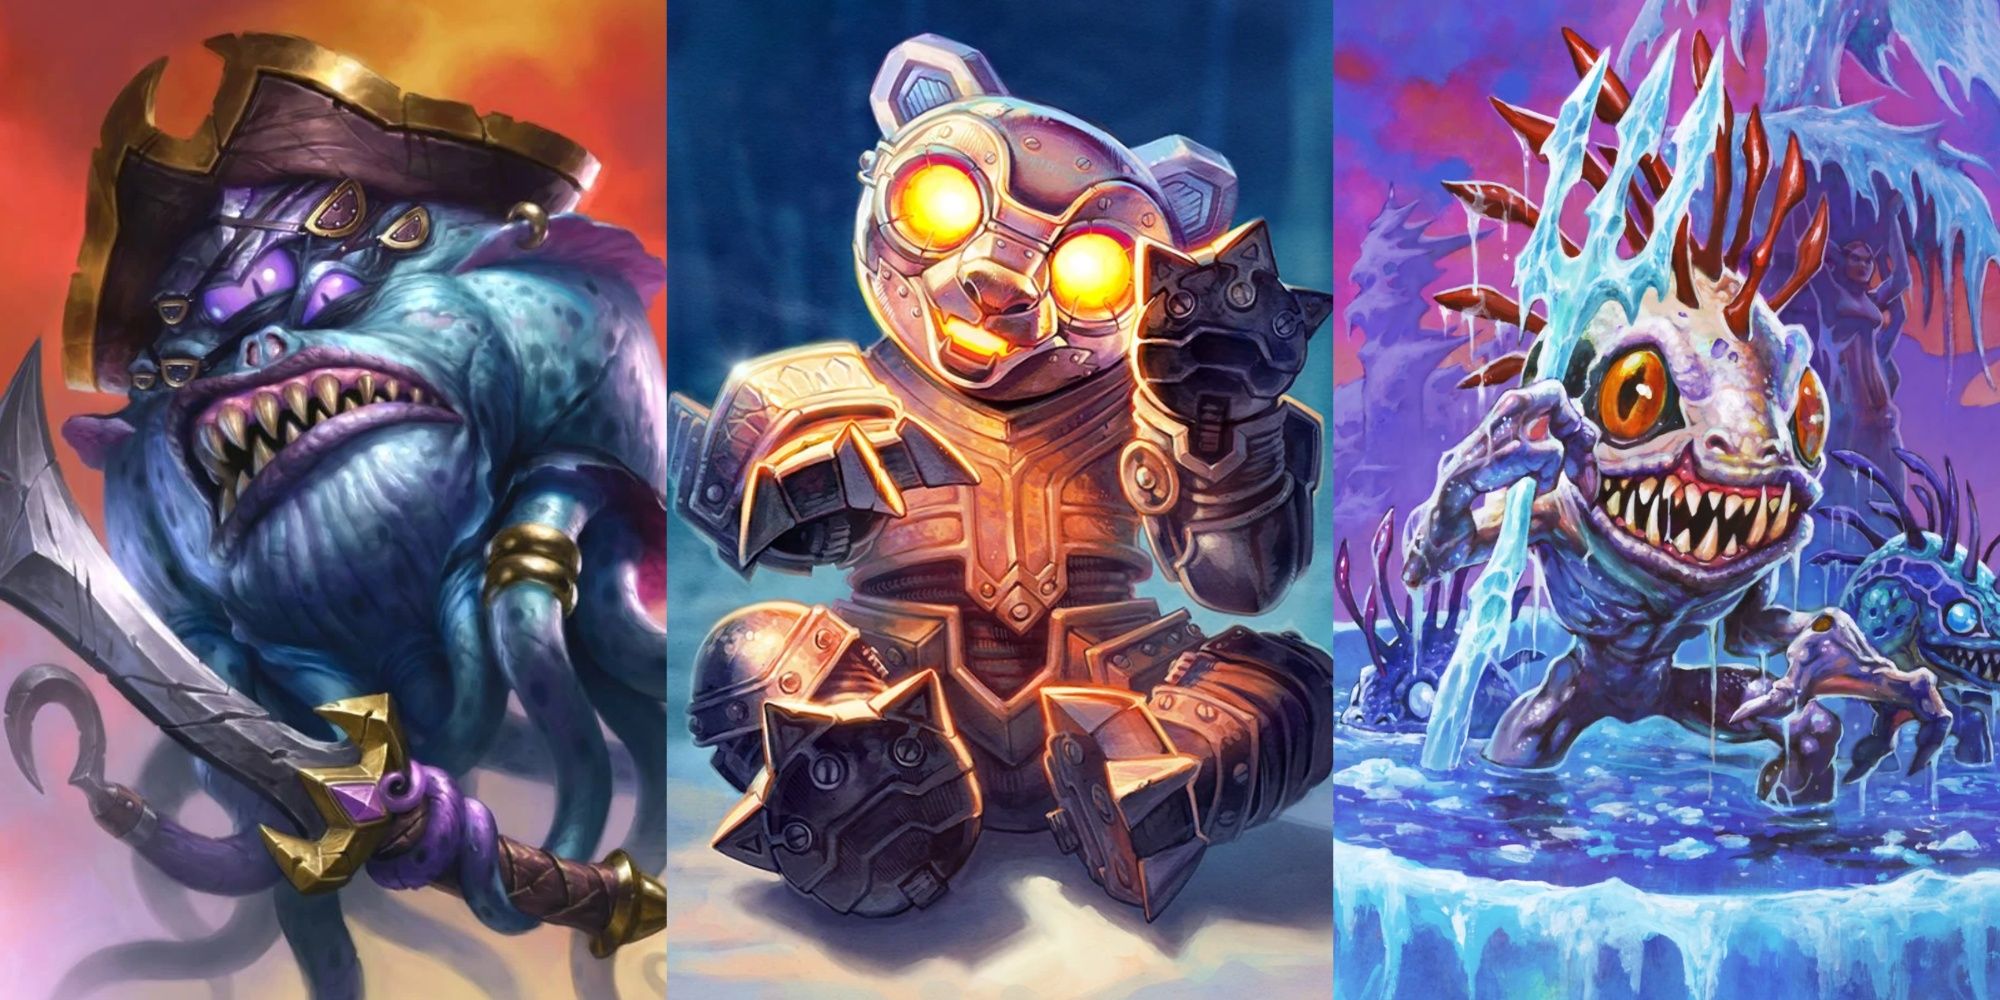 Patches the Pirate, Anodized Robo Cub, and Rotgill Hearthstone Full Art